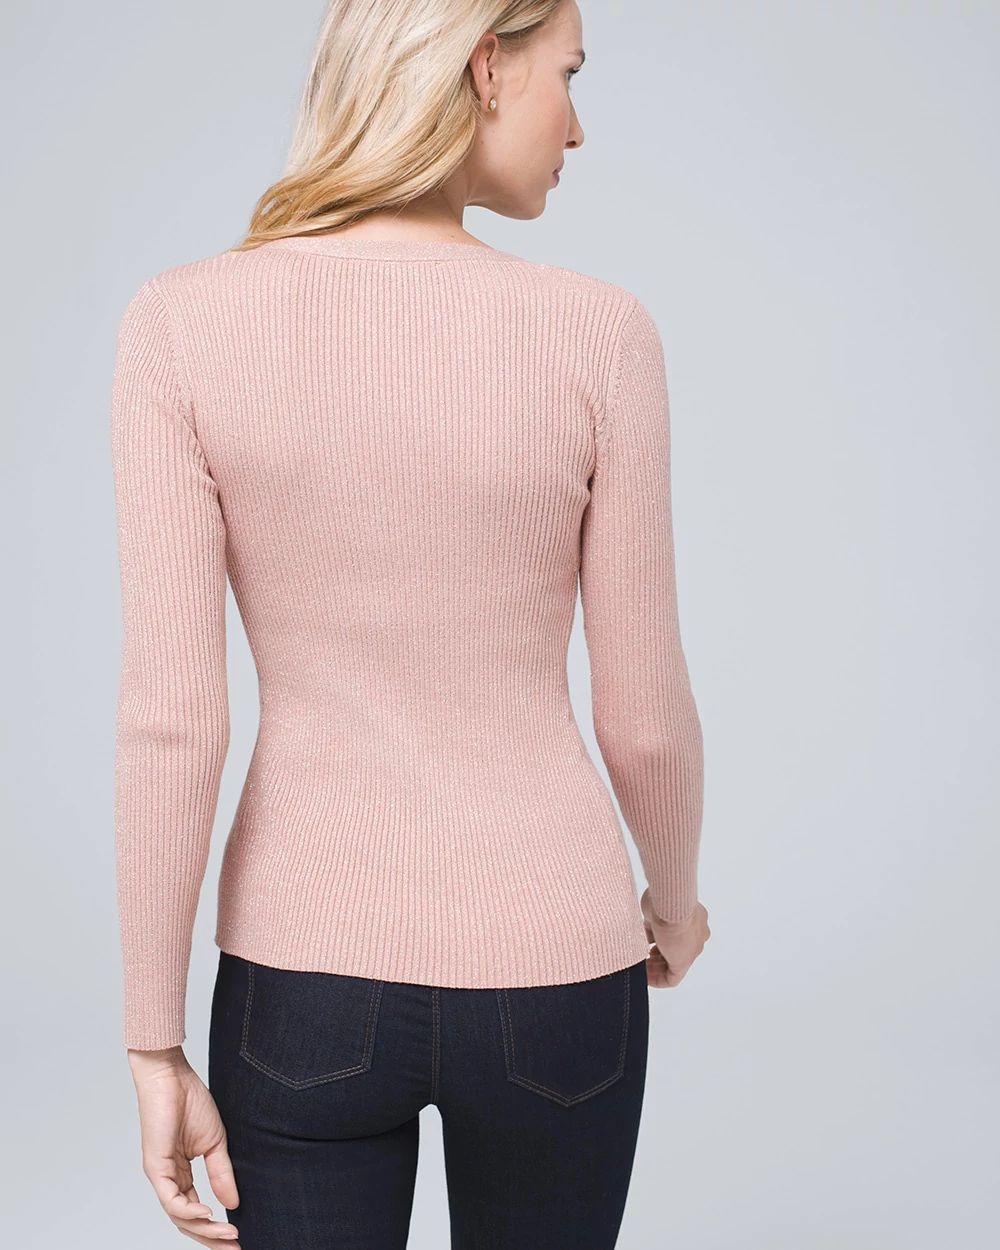 Ribbed Henley click to view larger image.